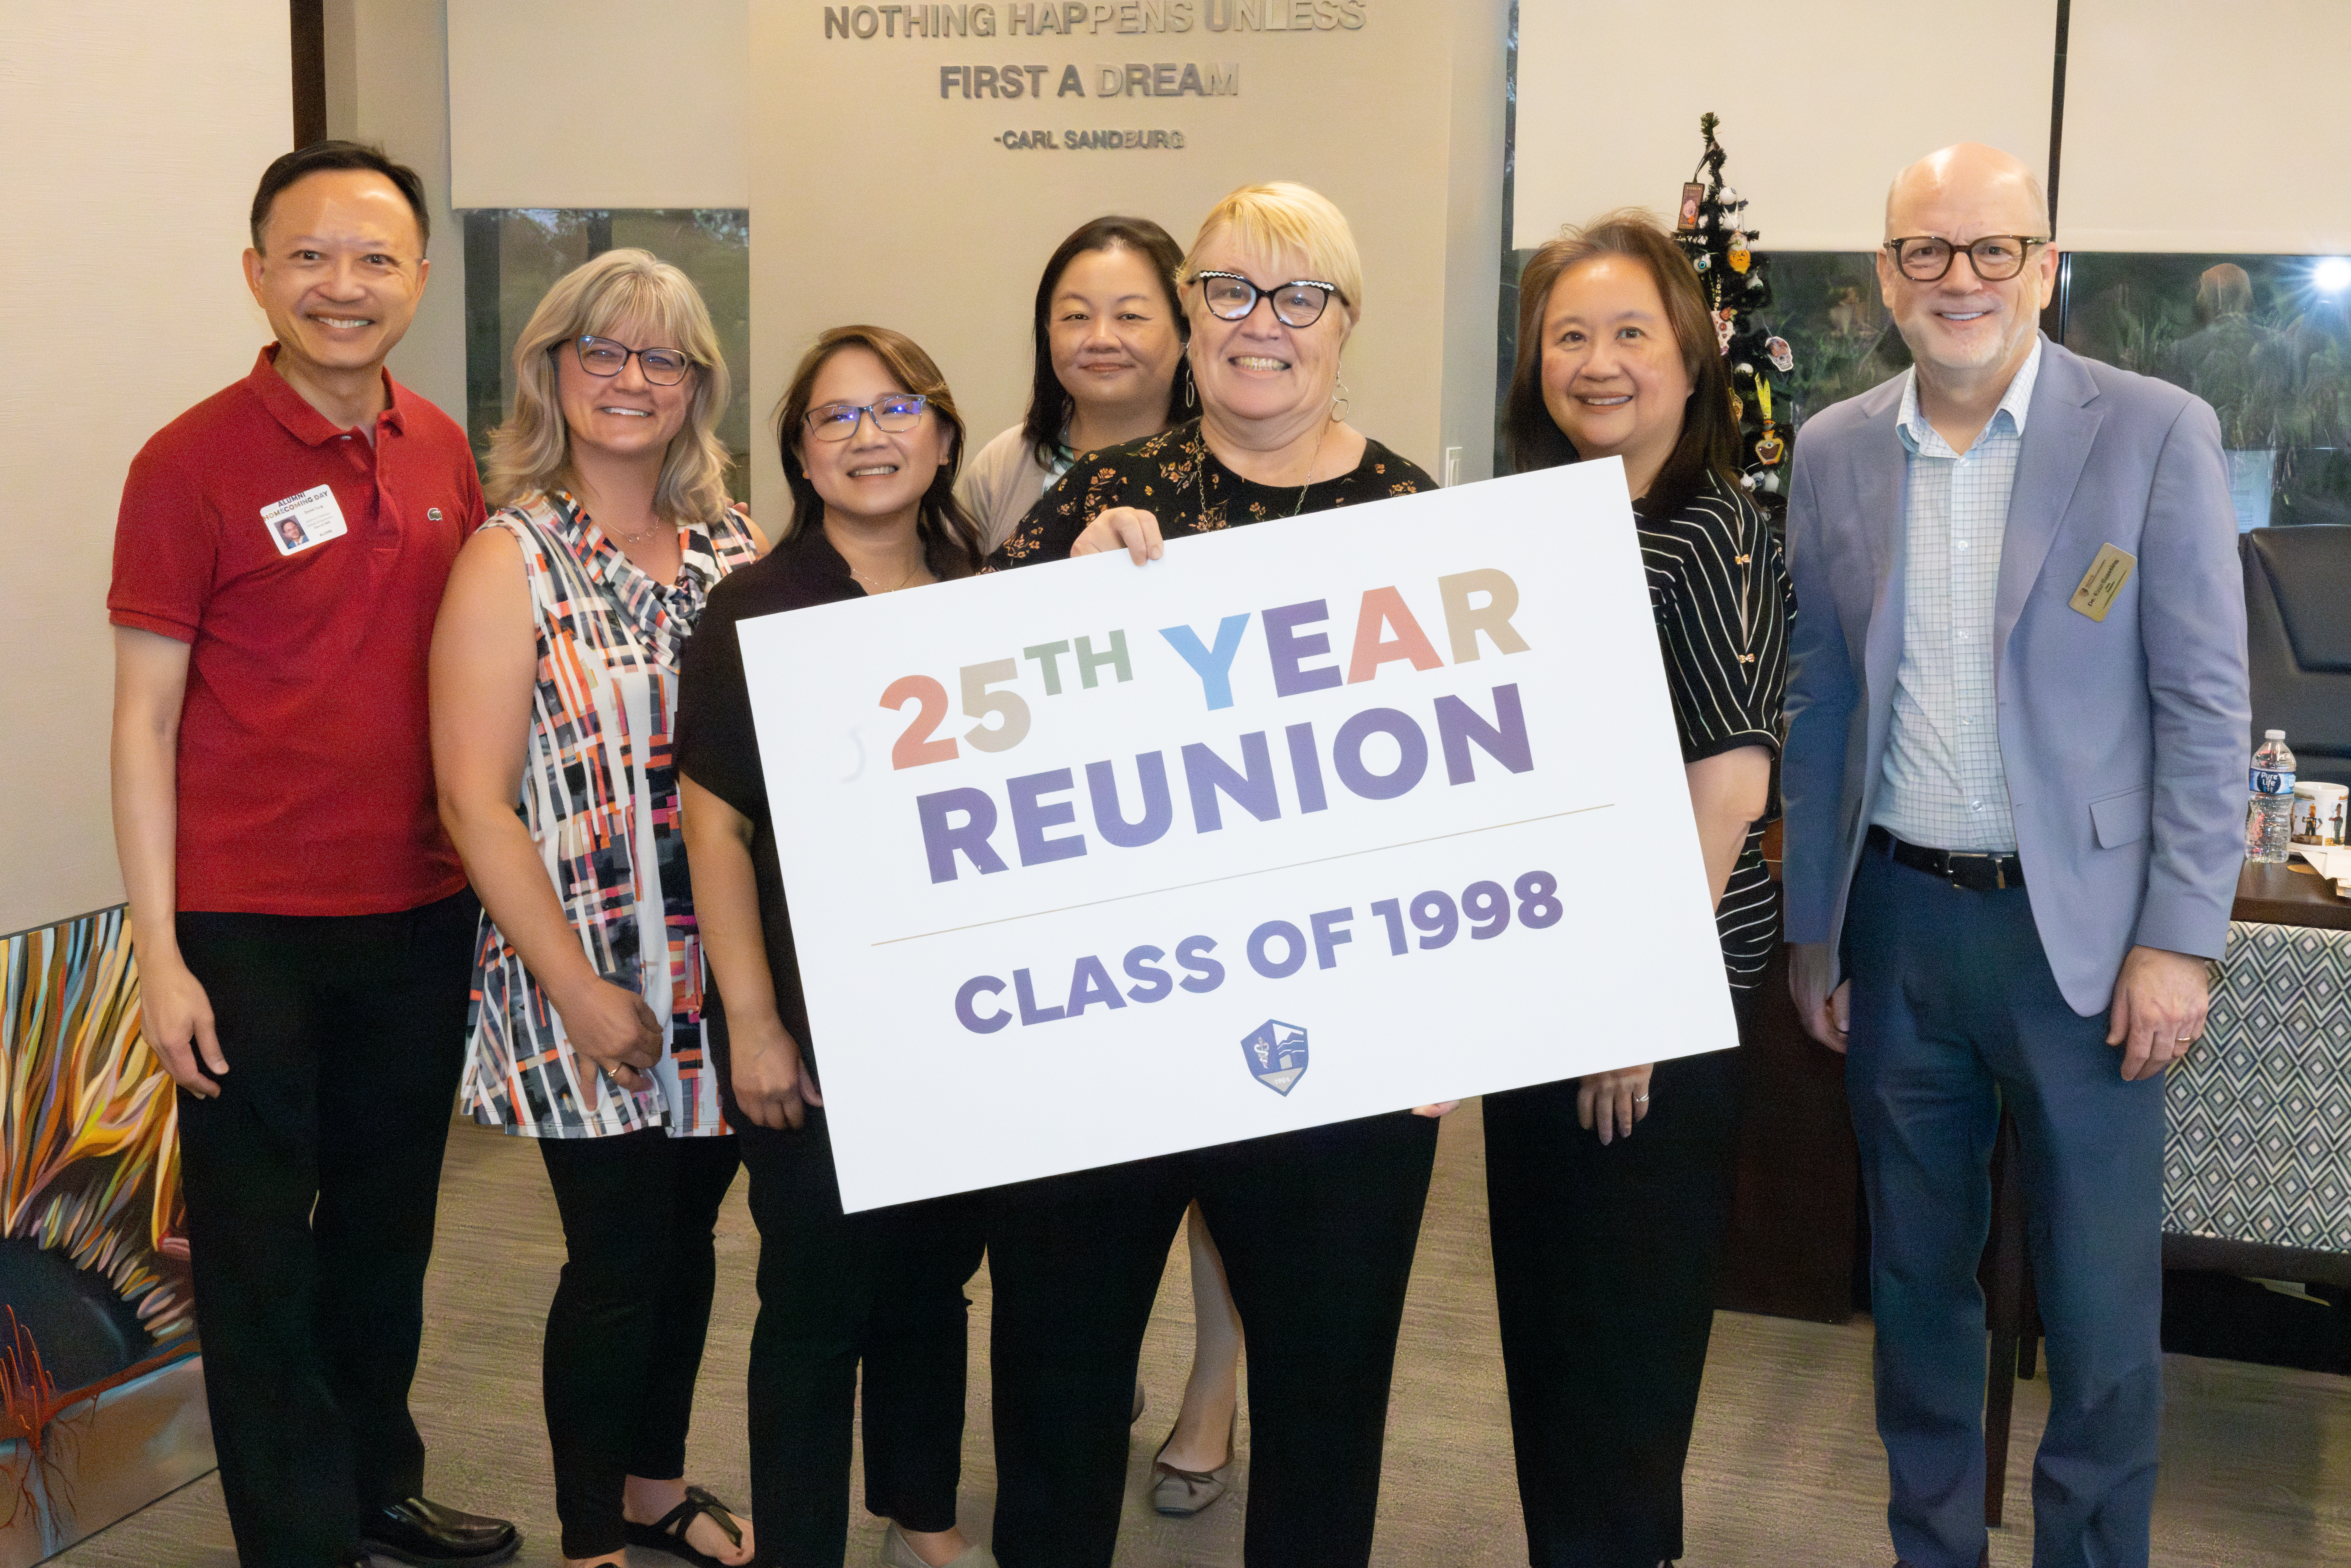 President Schornack poses with Class of 1998 reunion attendees